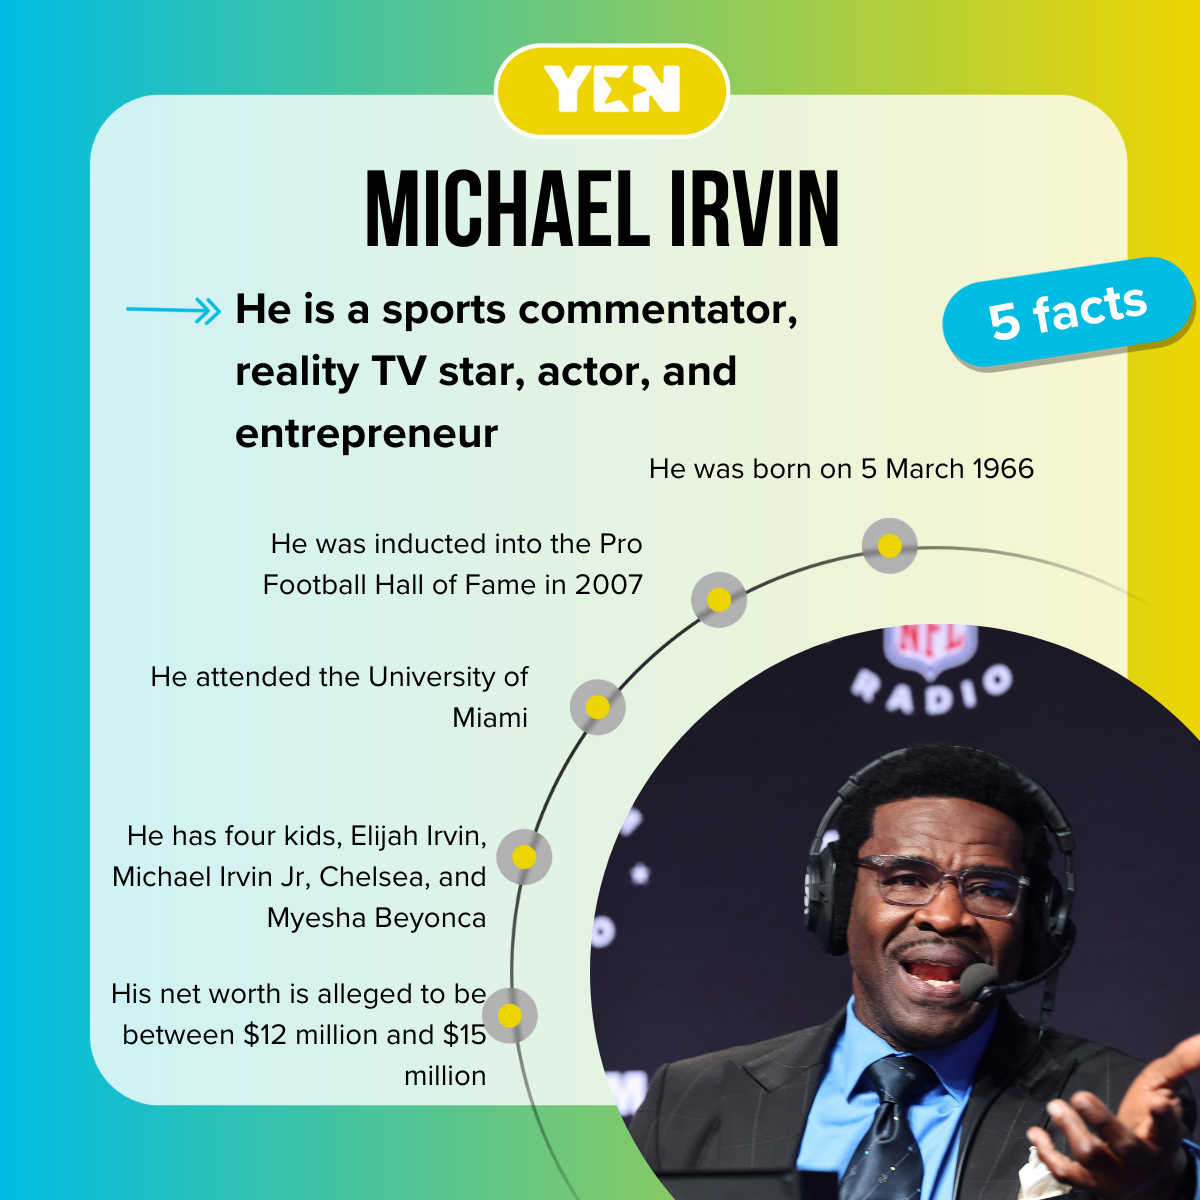 Facts about Michael Irvin